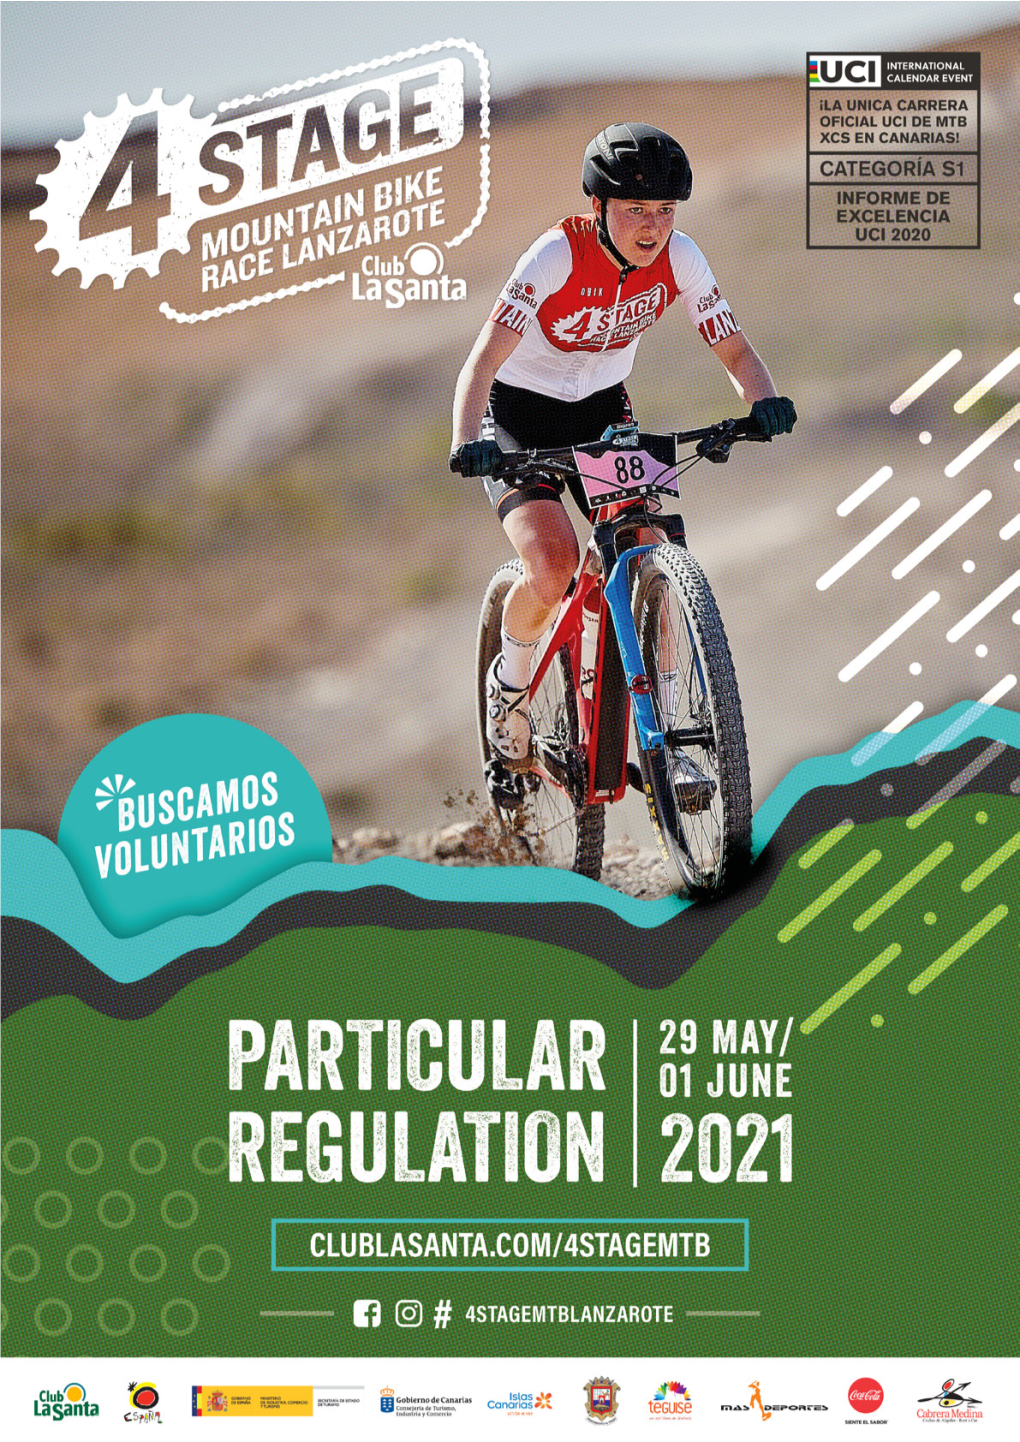 2021 Athlete Guide and Specific Event Regulations